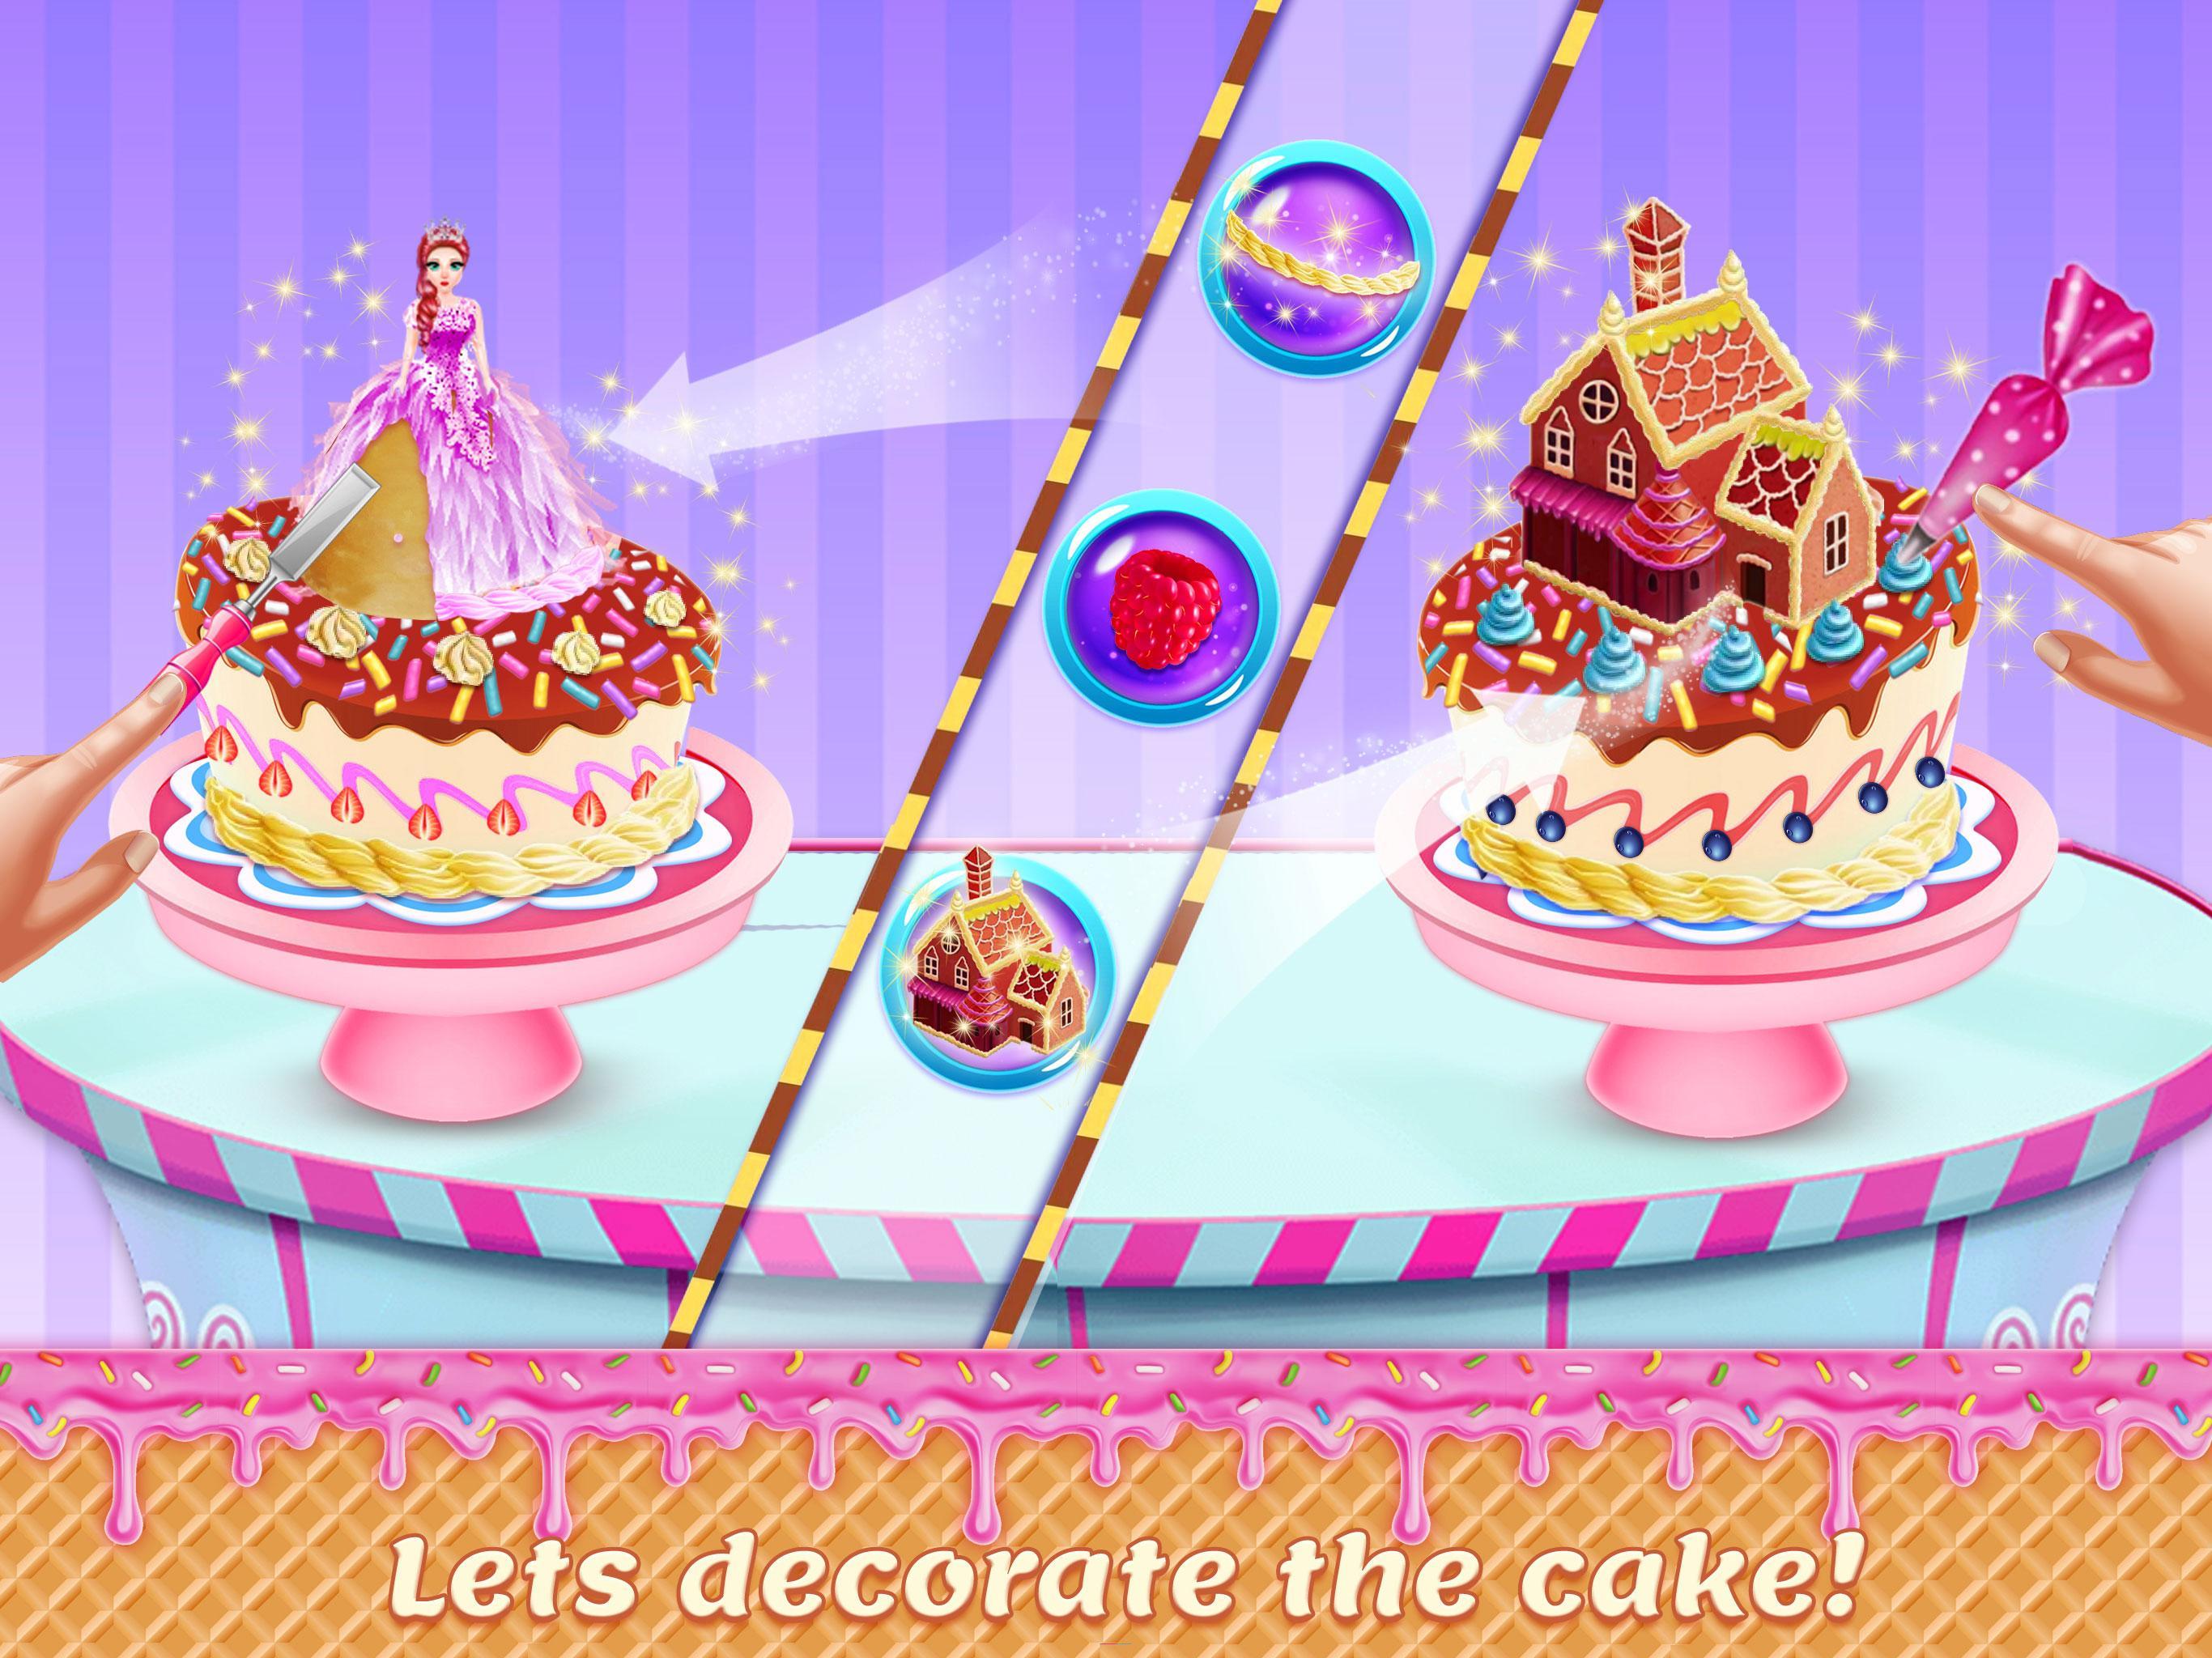 Doll cake decorating Cake Game Apk Download for Android- Latest version  1.2.2- com.doll.cake.maker.dollcakedecorating.cooking.game